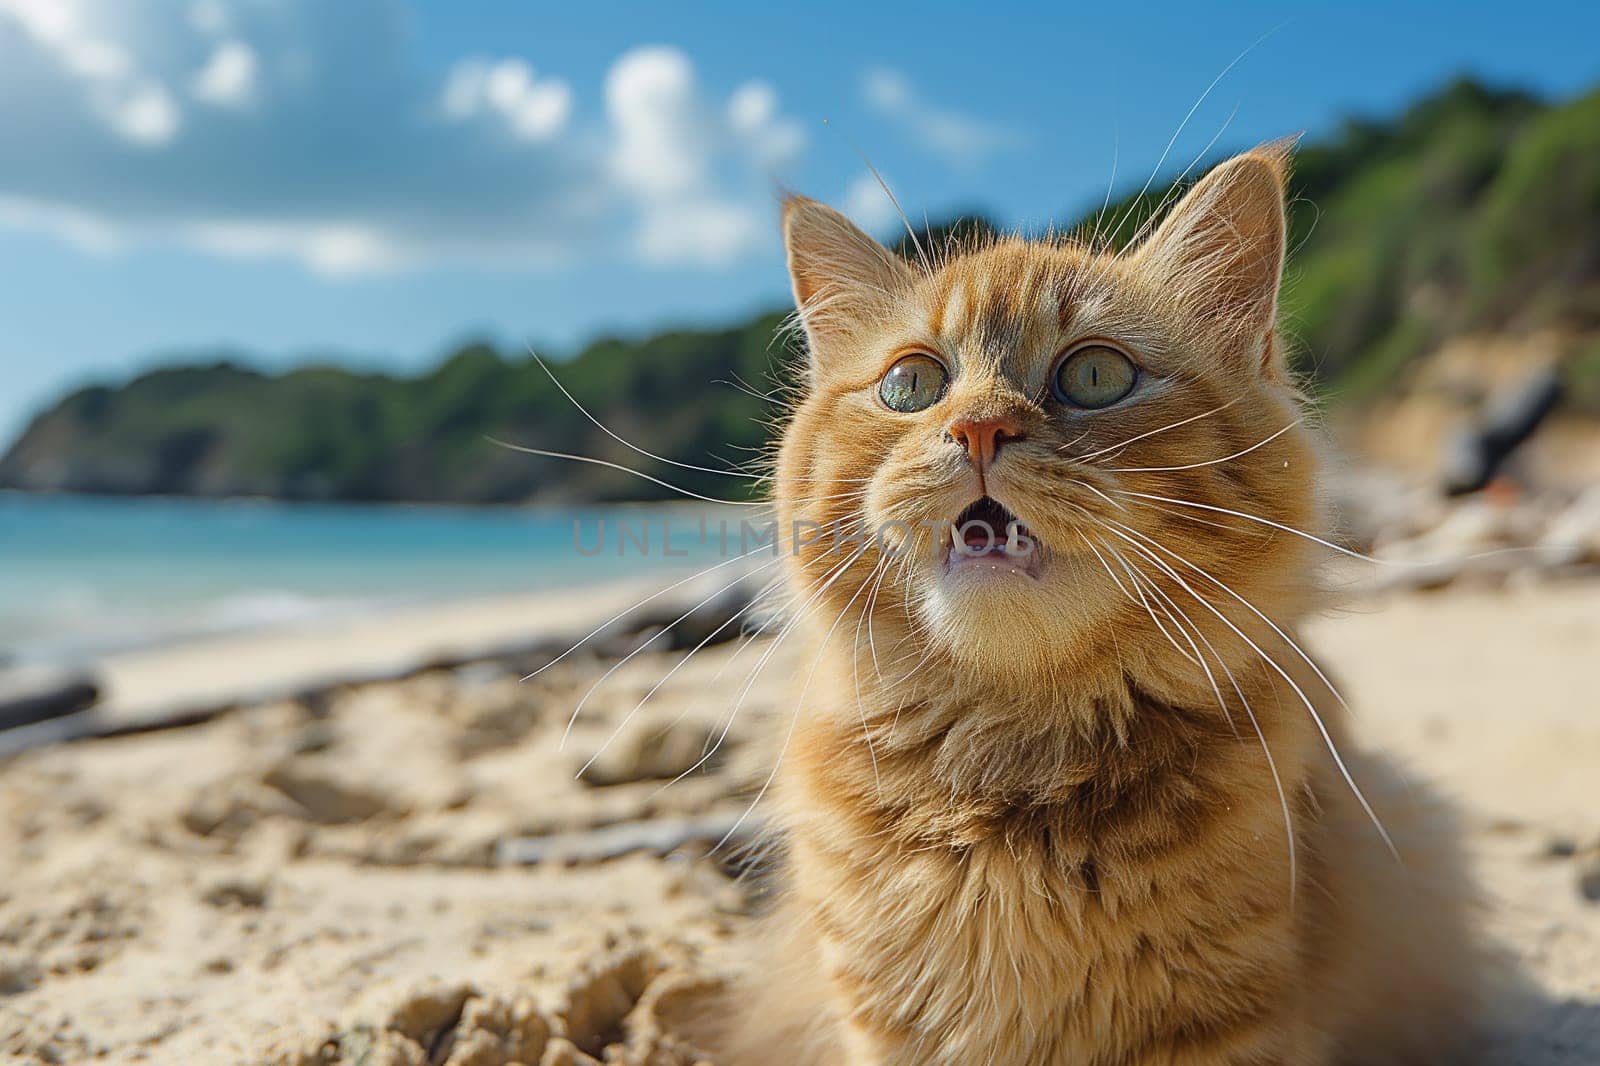 An orange cat yawing at the beach